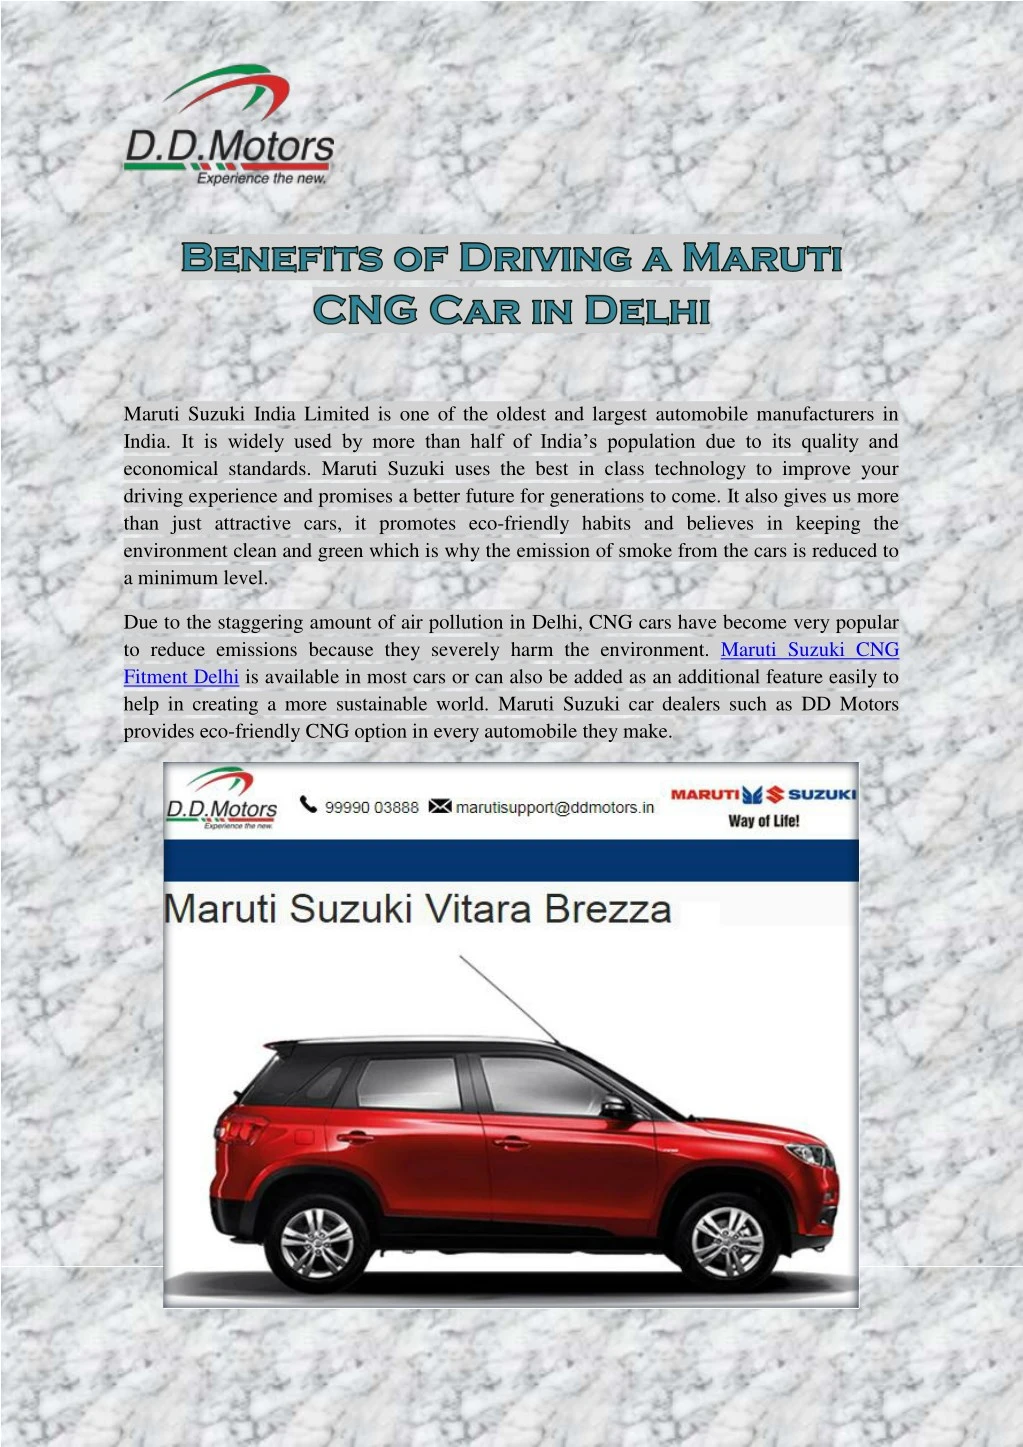 maruti suzuki india limited is one of the oldest